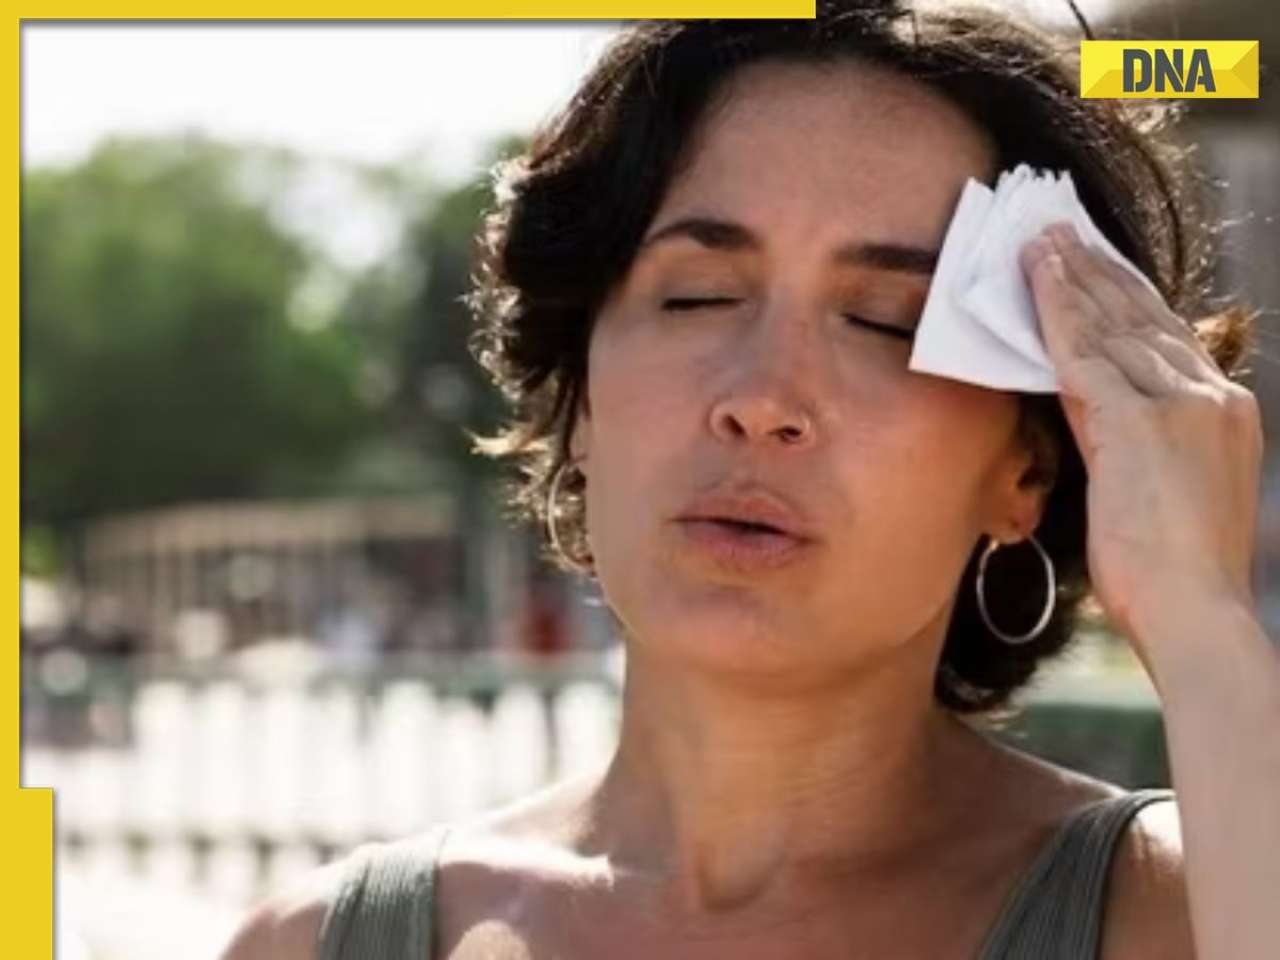 Heatwave: Severe signs and symptoms of heat stroke you shouldn't ignore